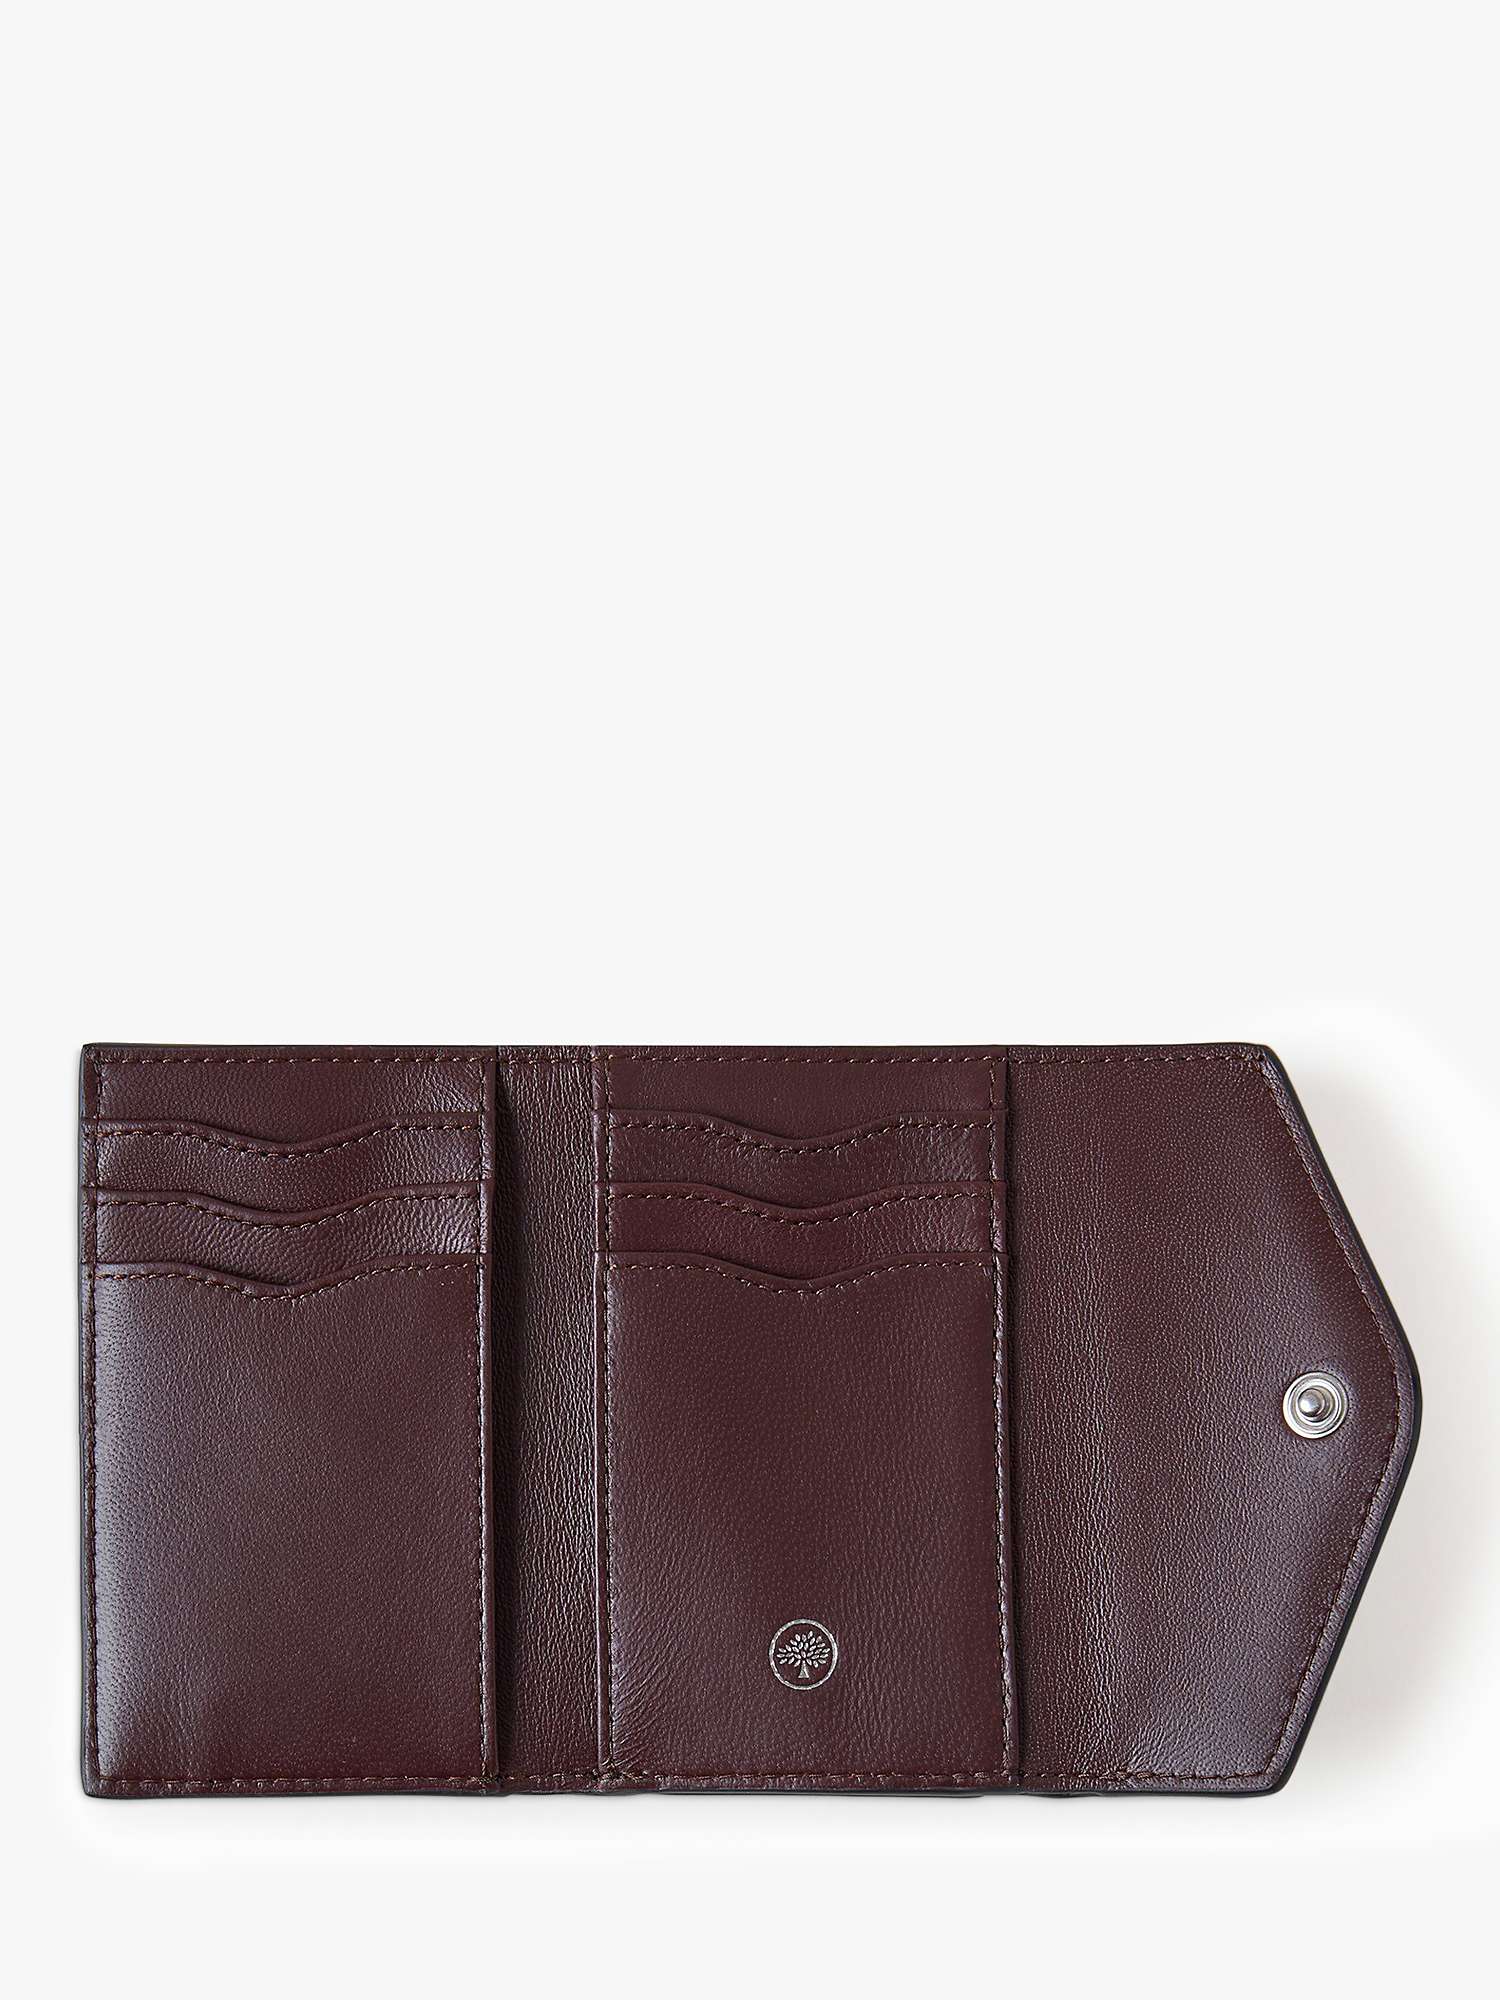 Buy Mulberry Folded Multi-Card Heavy Grain Leather Wallet Online at johnlewis.com